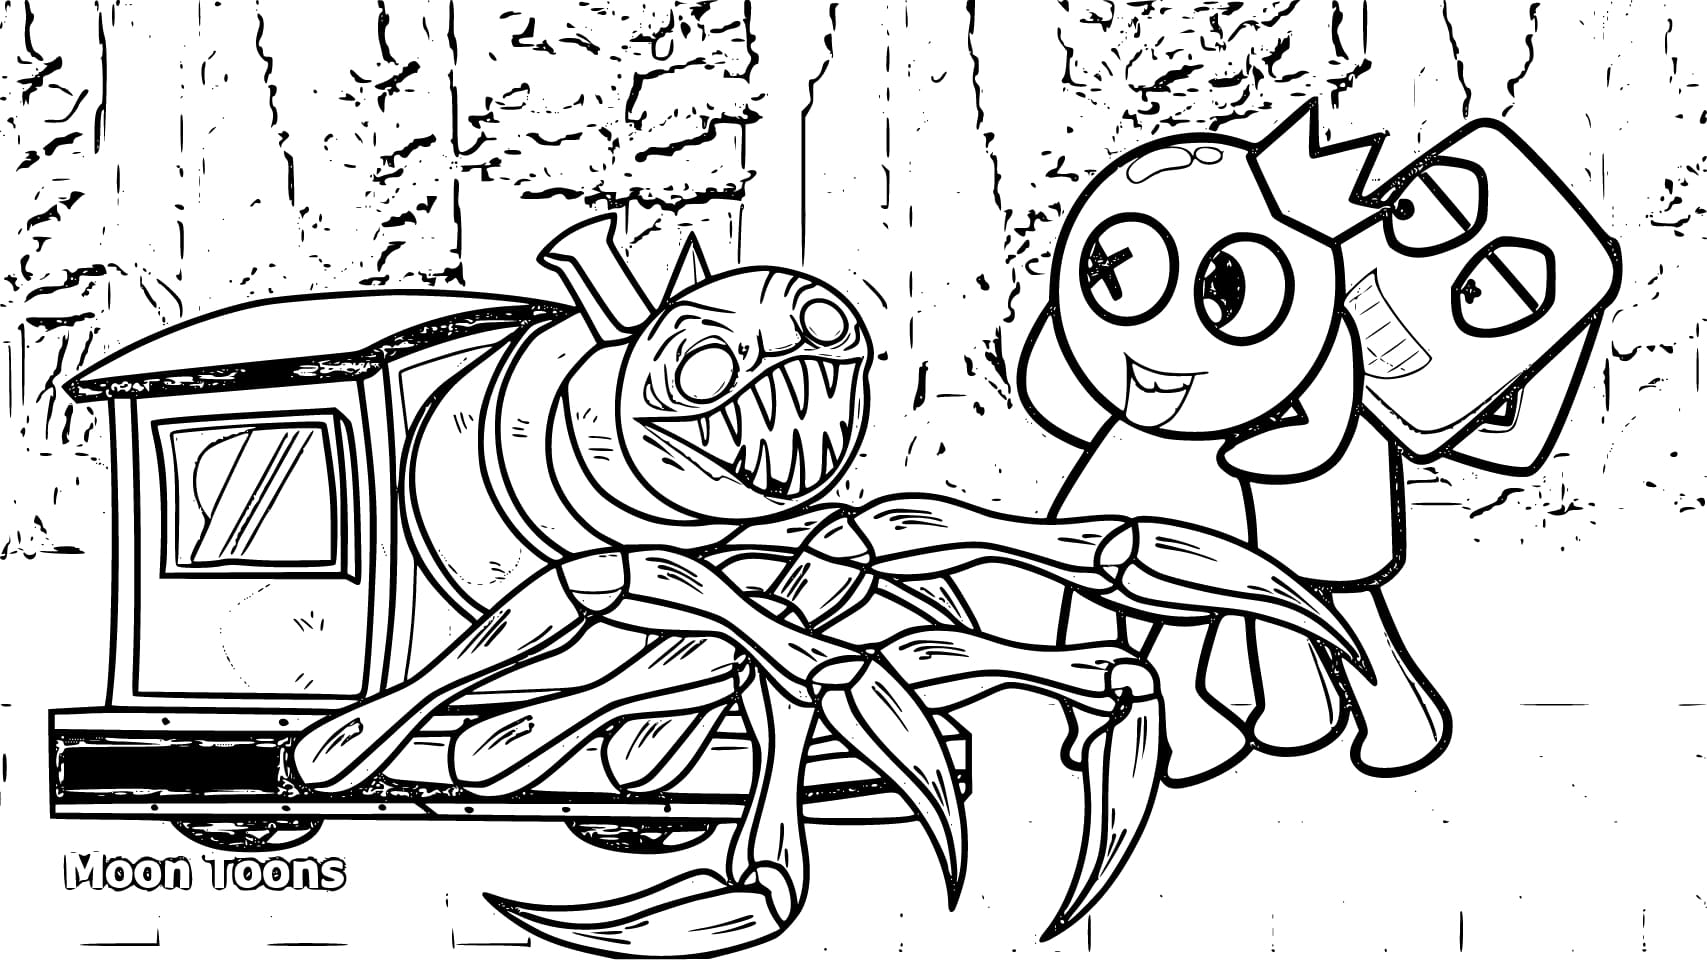 Choo-Choo Charles Coloring Pages  WONDER DAY — Coloring pages for children  and adults